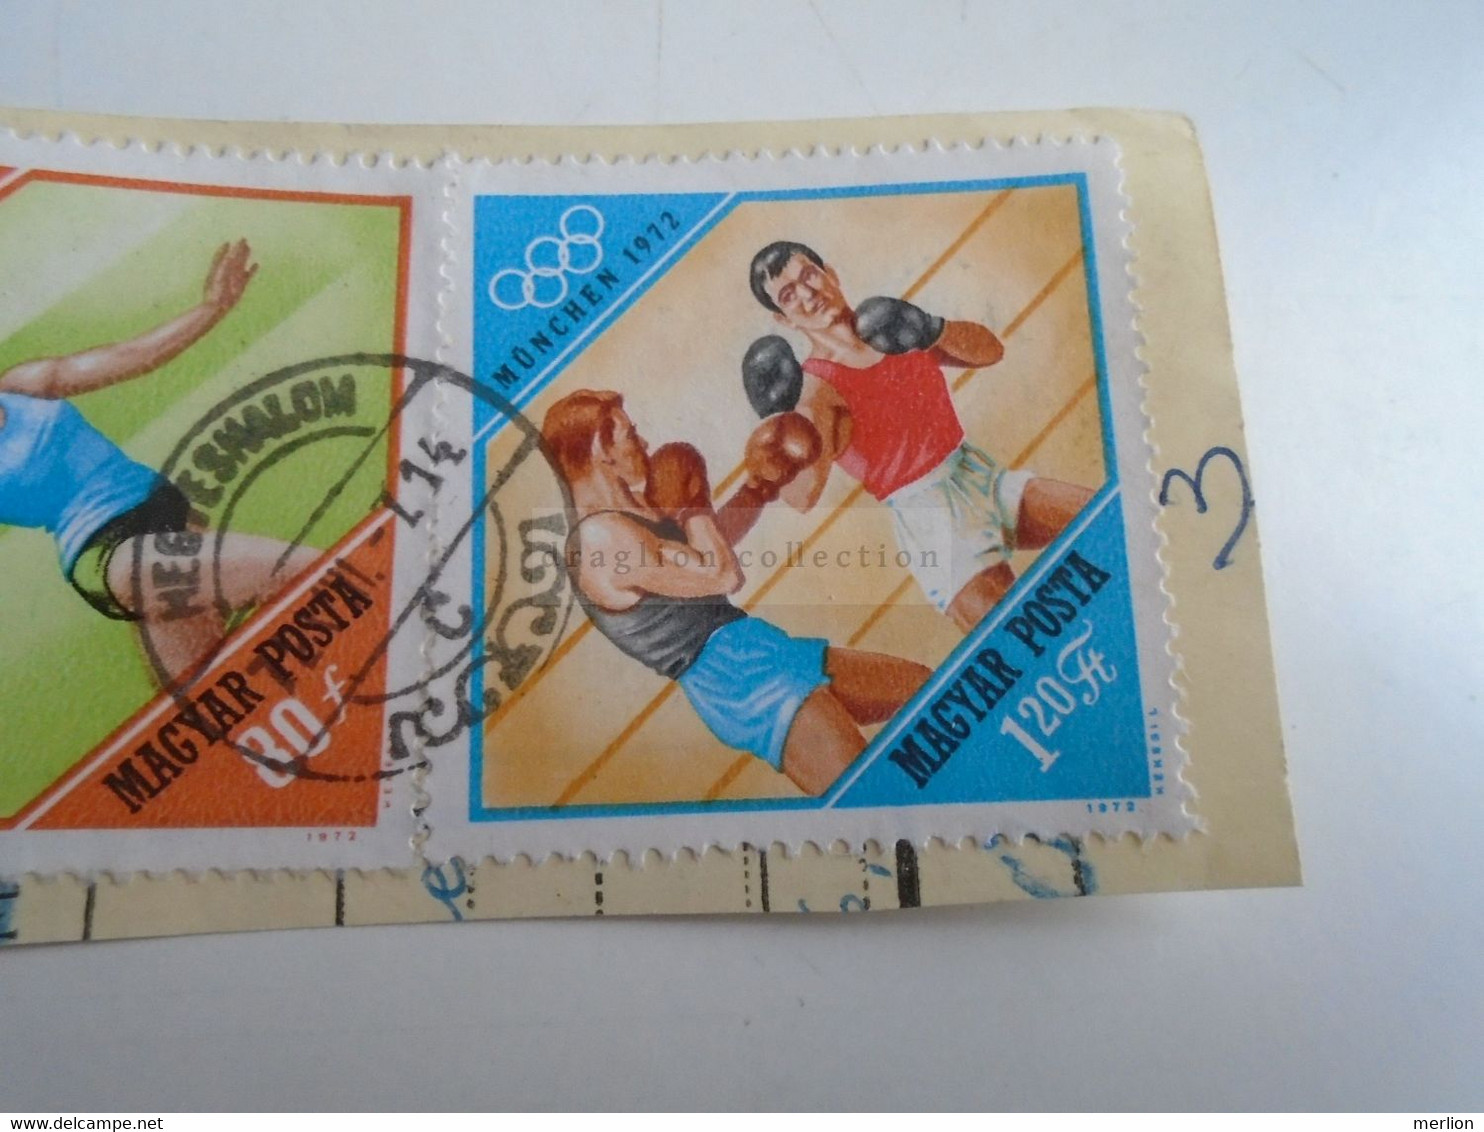 D187486   Parcel Card  (cut) Hungary 1972 Hegyeshalom  - Stamp München Olympic Games - Box Boxing - Pacchi Postali